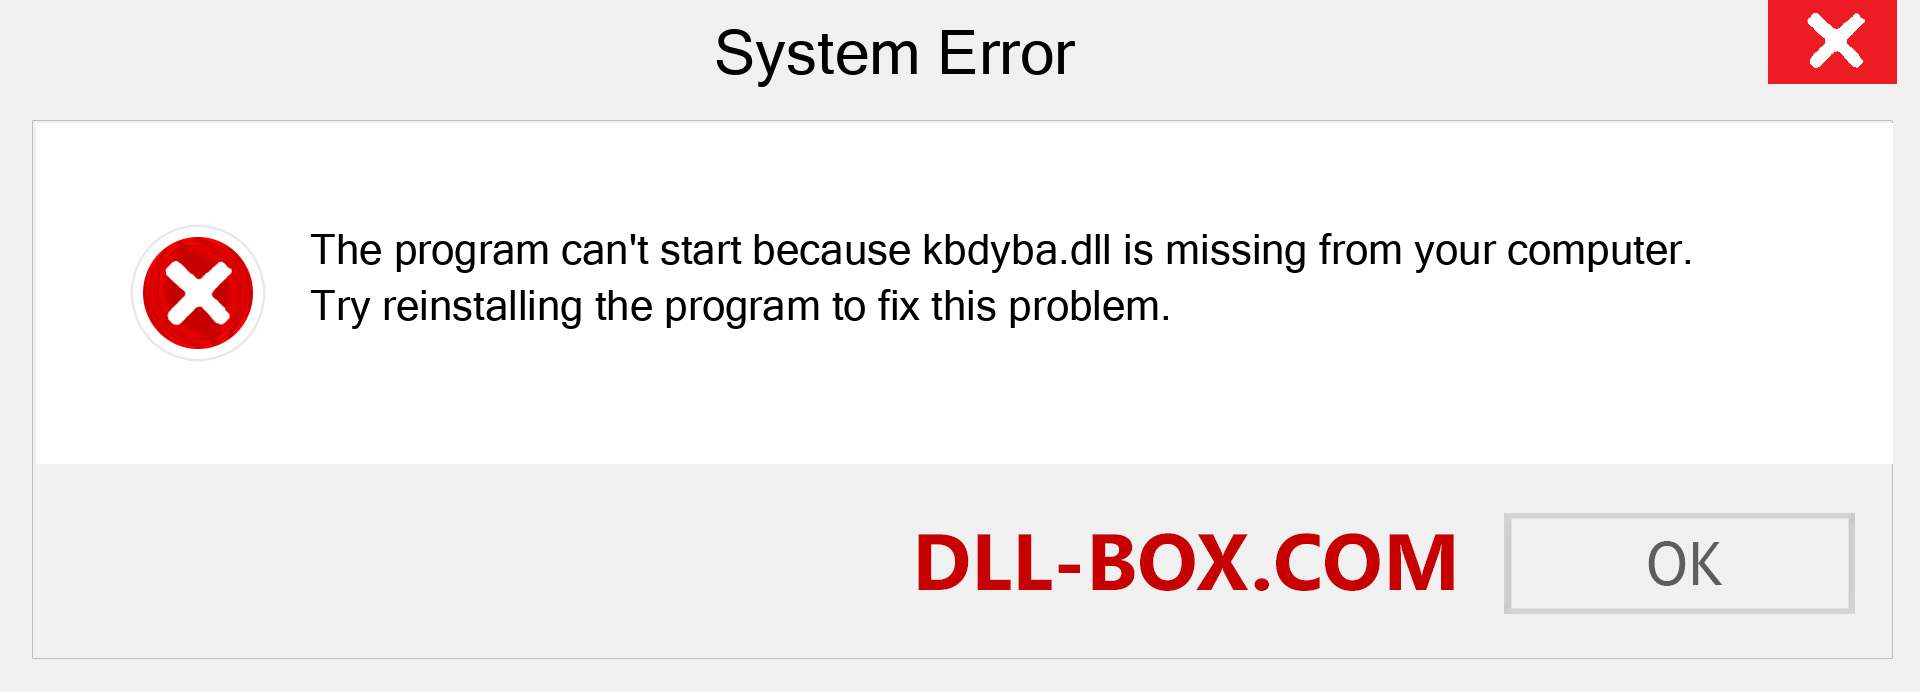  kbdyba.dll file is missing?. Download for Windows 7, 8, 10 - Fix  kbdyba dll Missing Error on Windows, photos, images